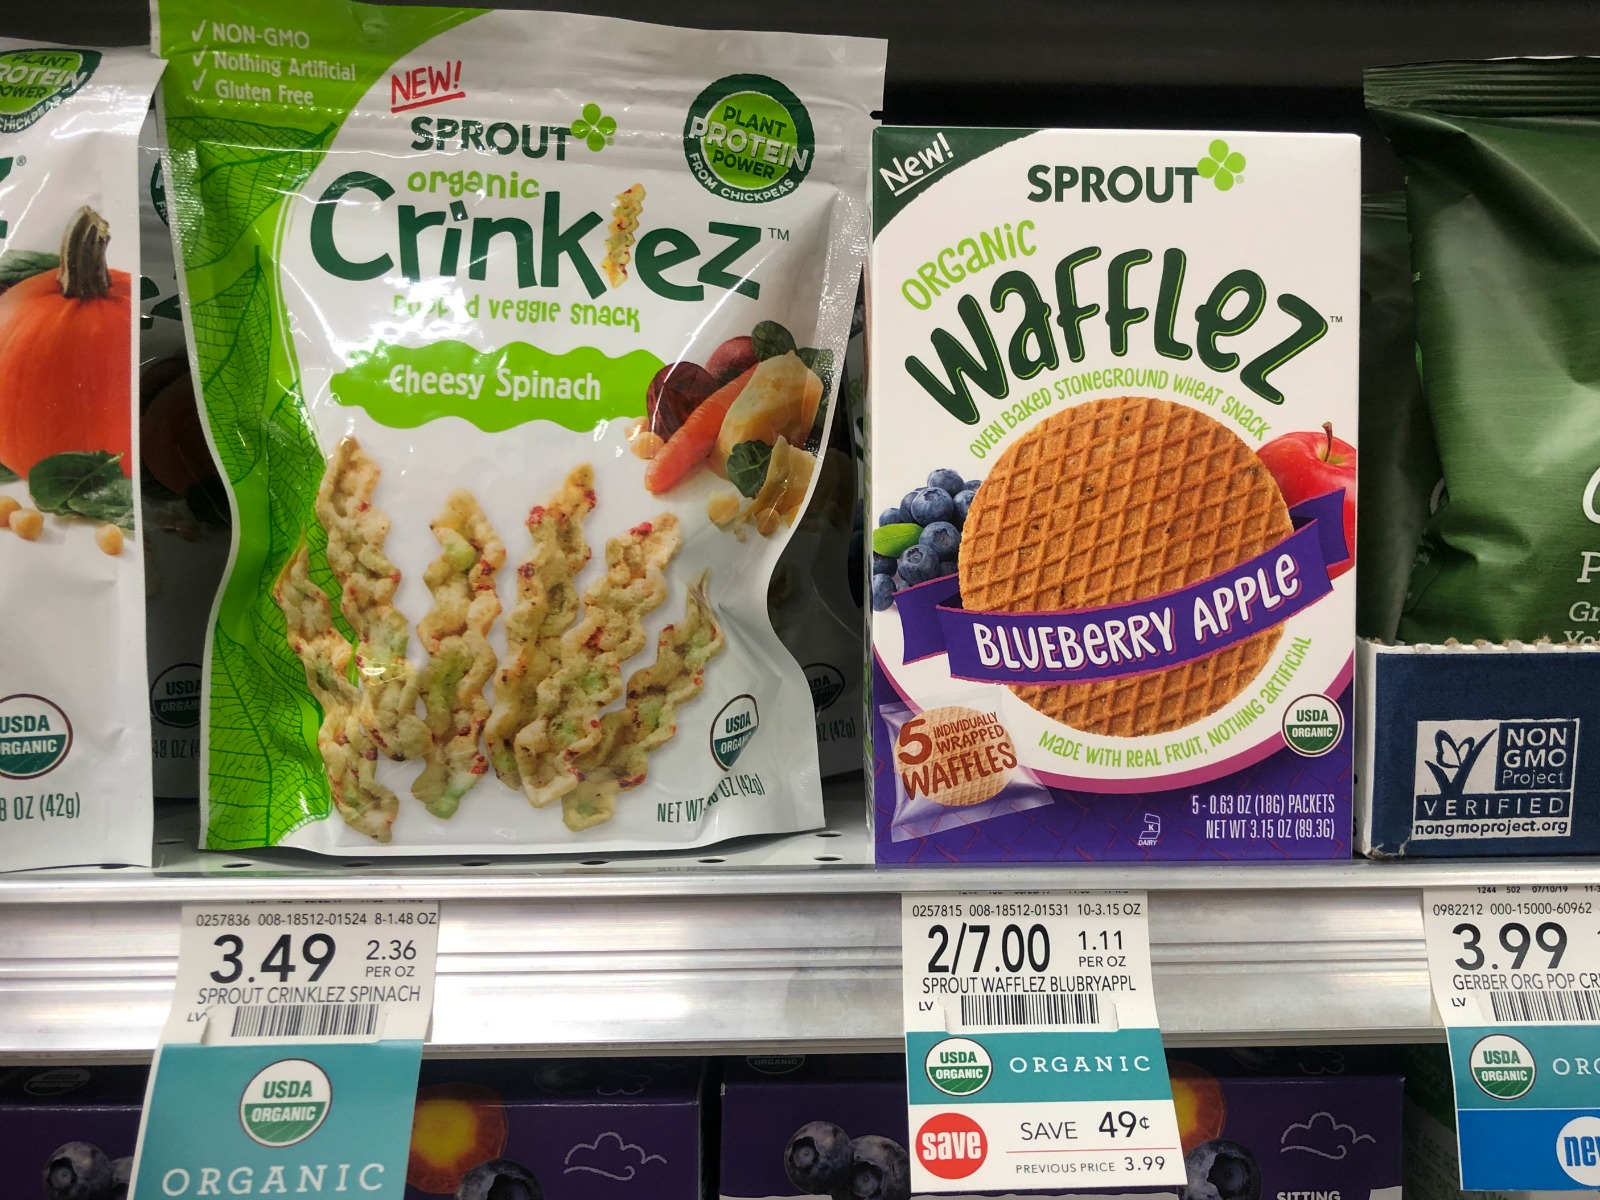 Save On New Sprout Organic Wafflez At Publix! on I Heart Publix